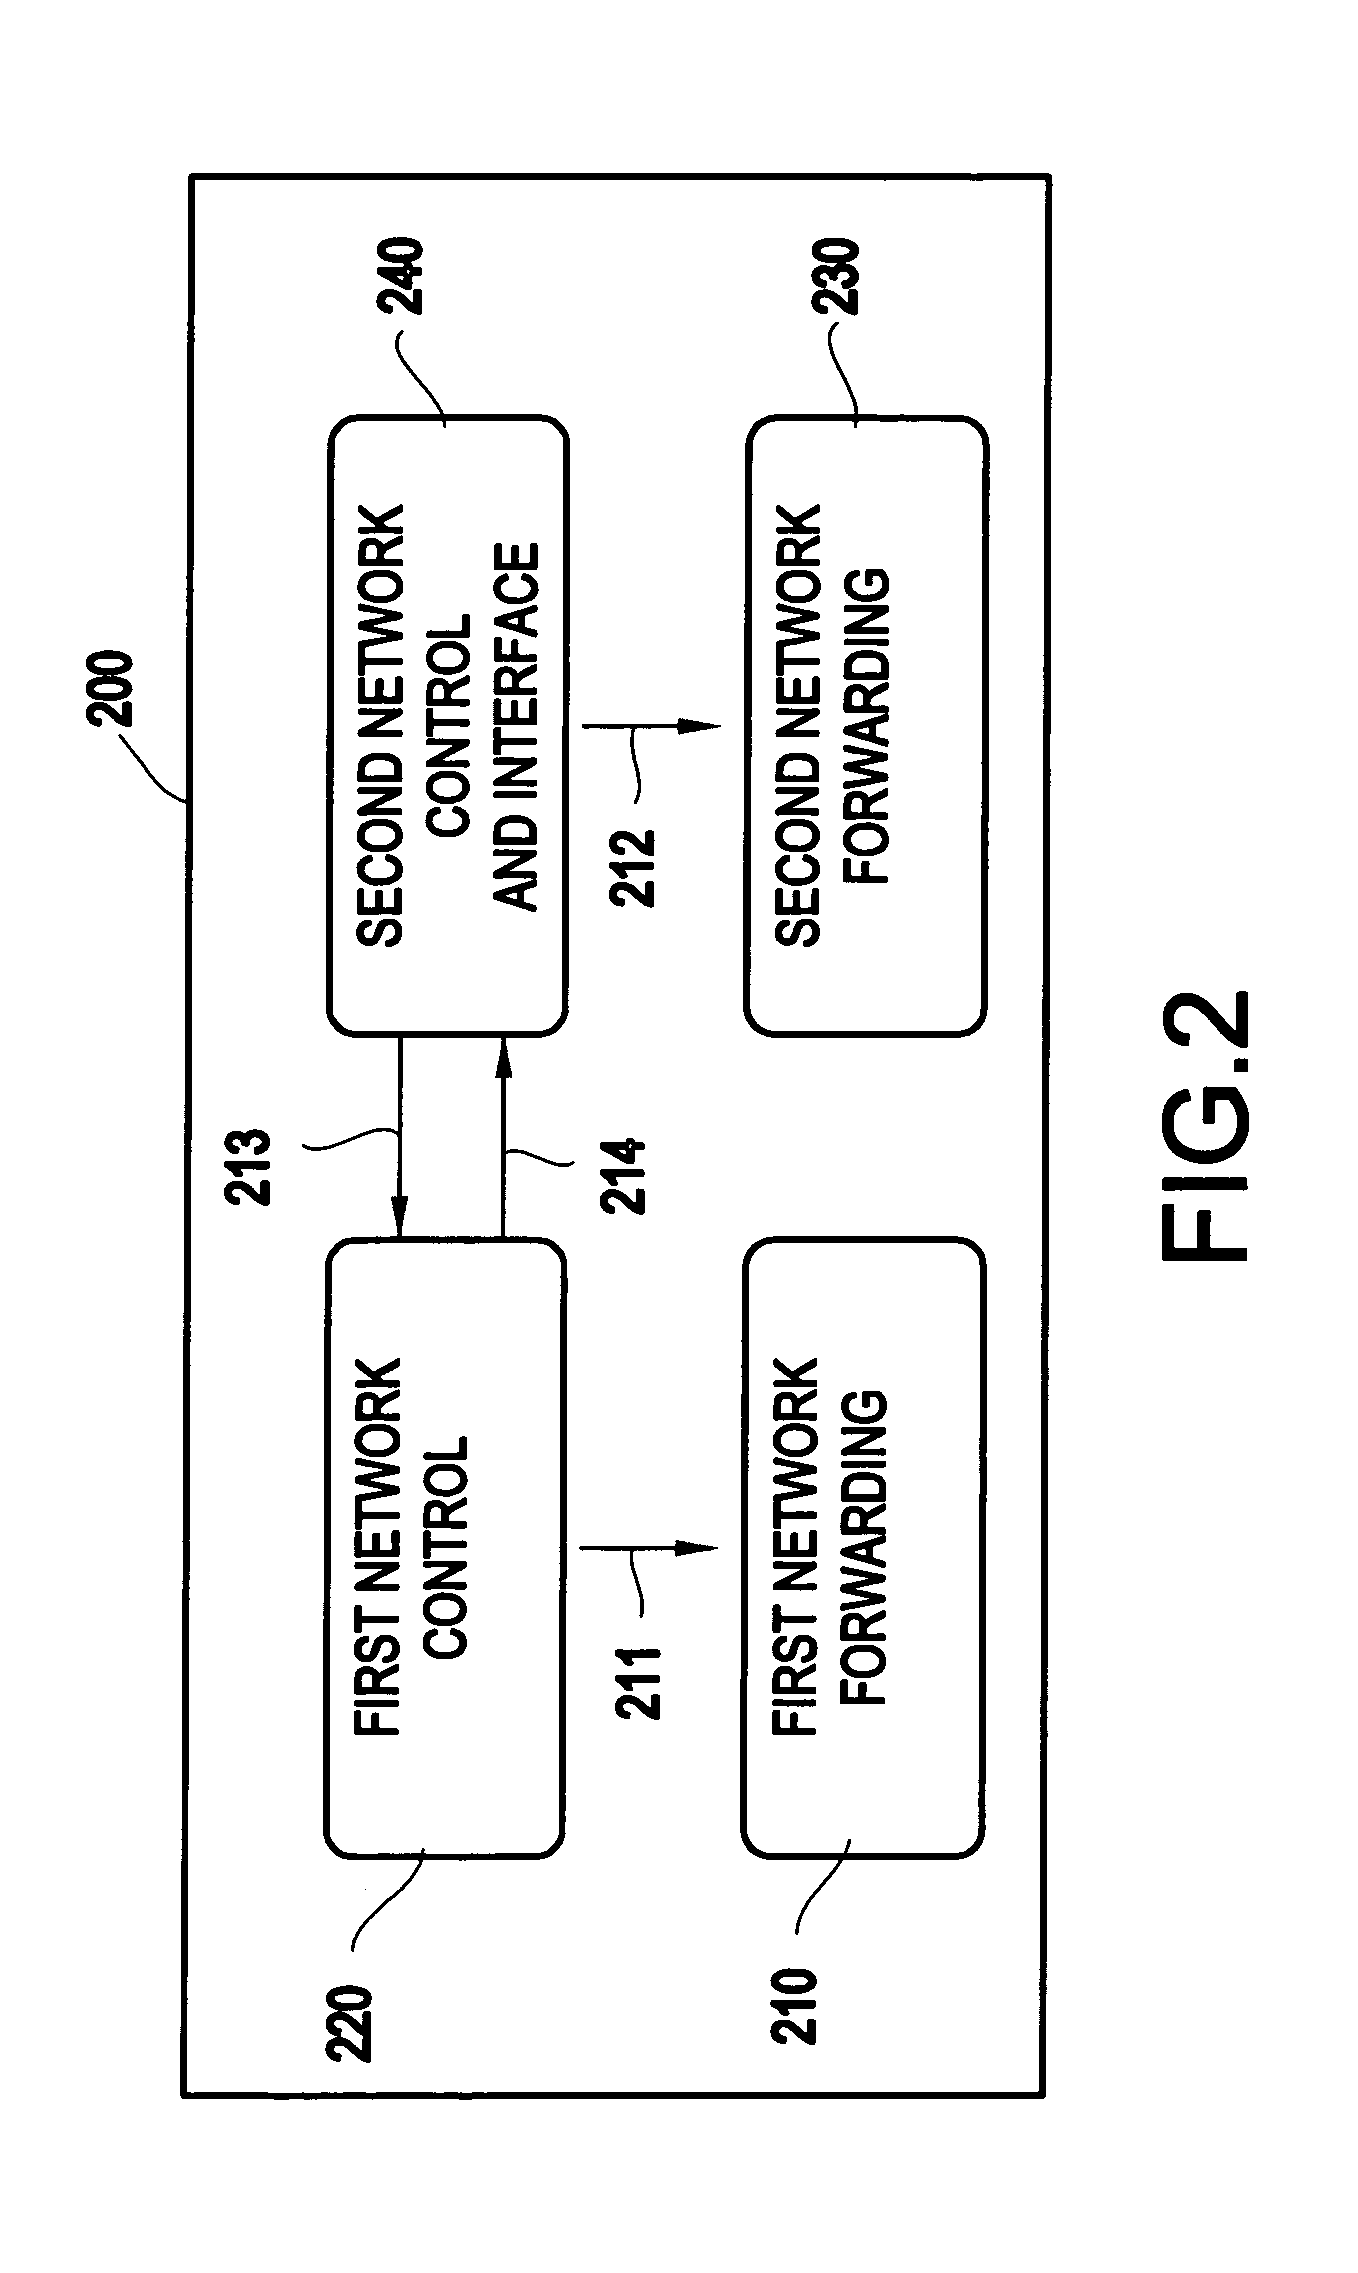 Network element providing an interworking function between plural networks, and system and method including the network element